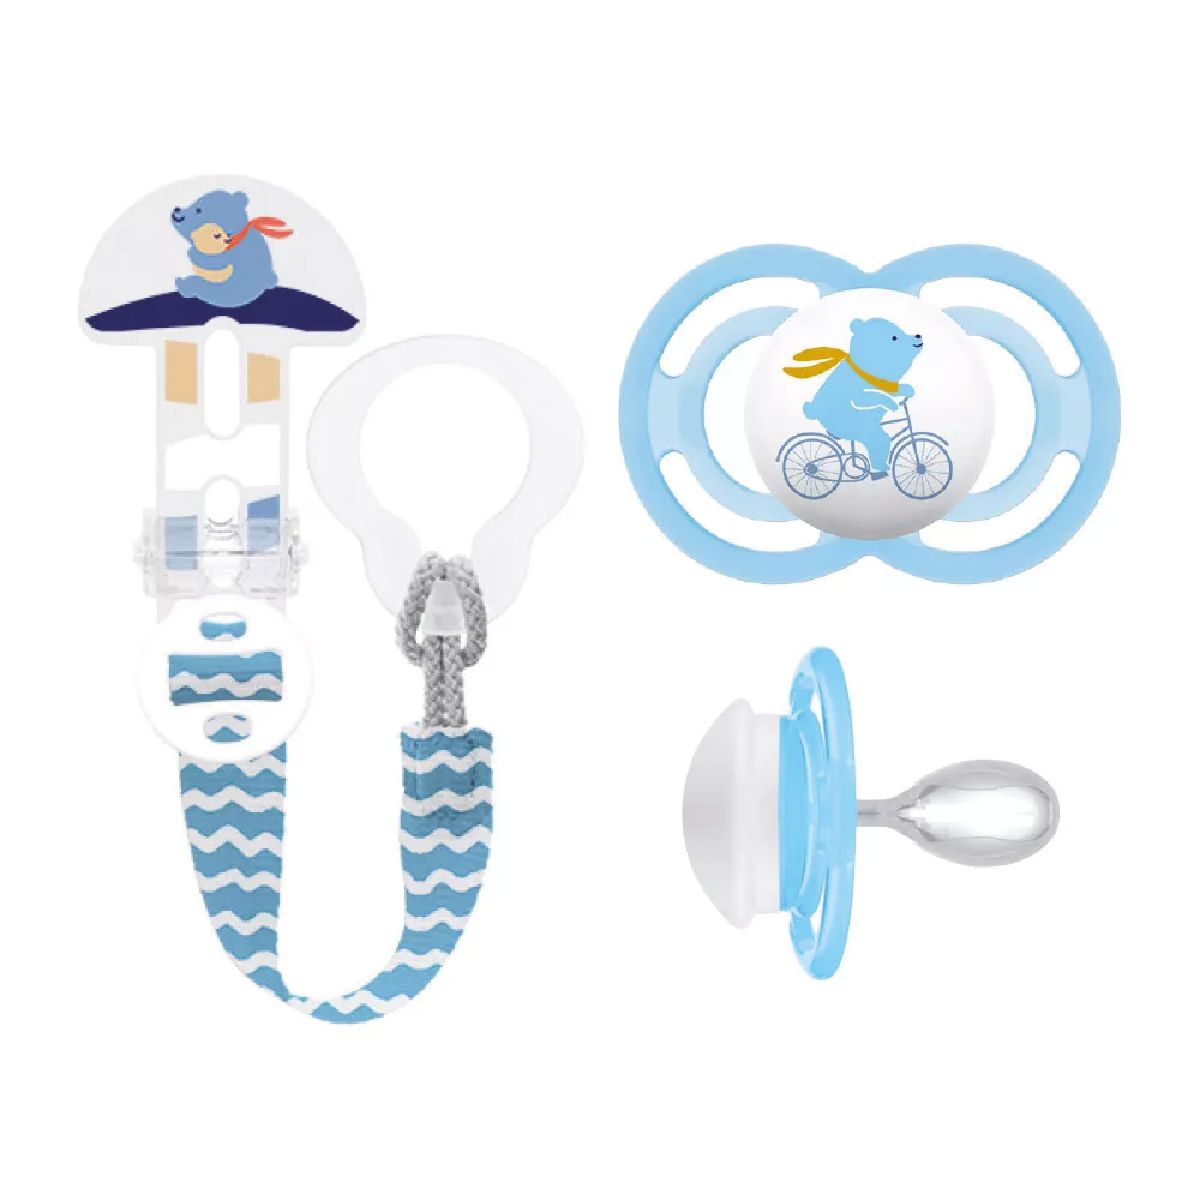 MAM Perfect 6+ & Clip it! Flow - Pacifier and Clip